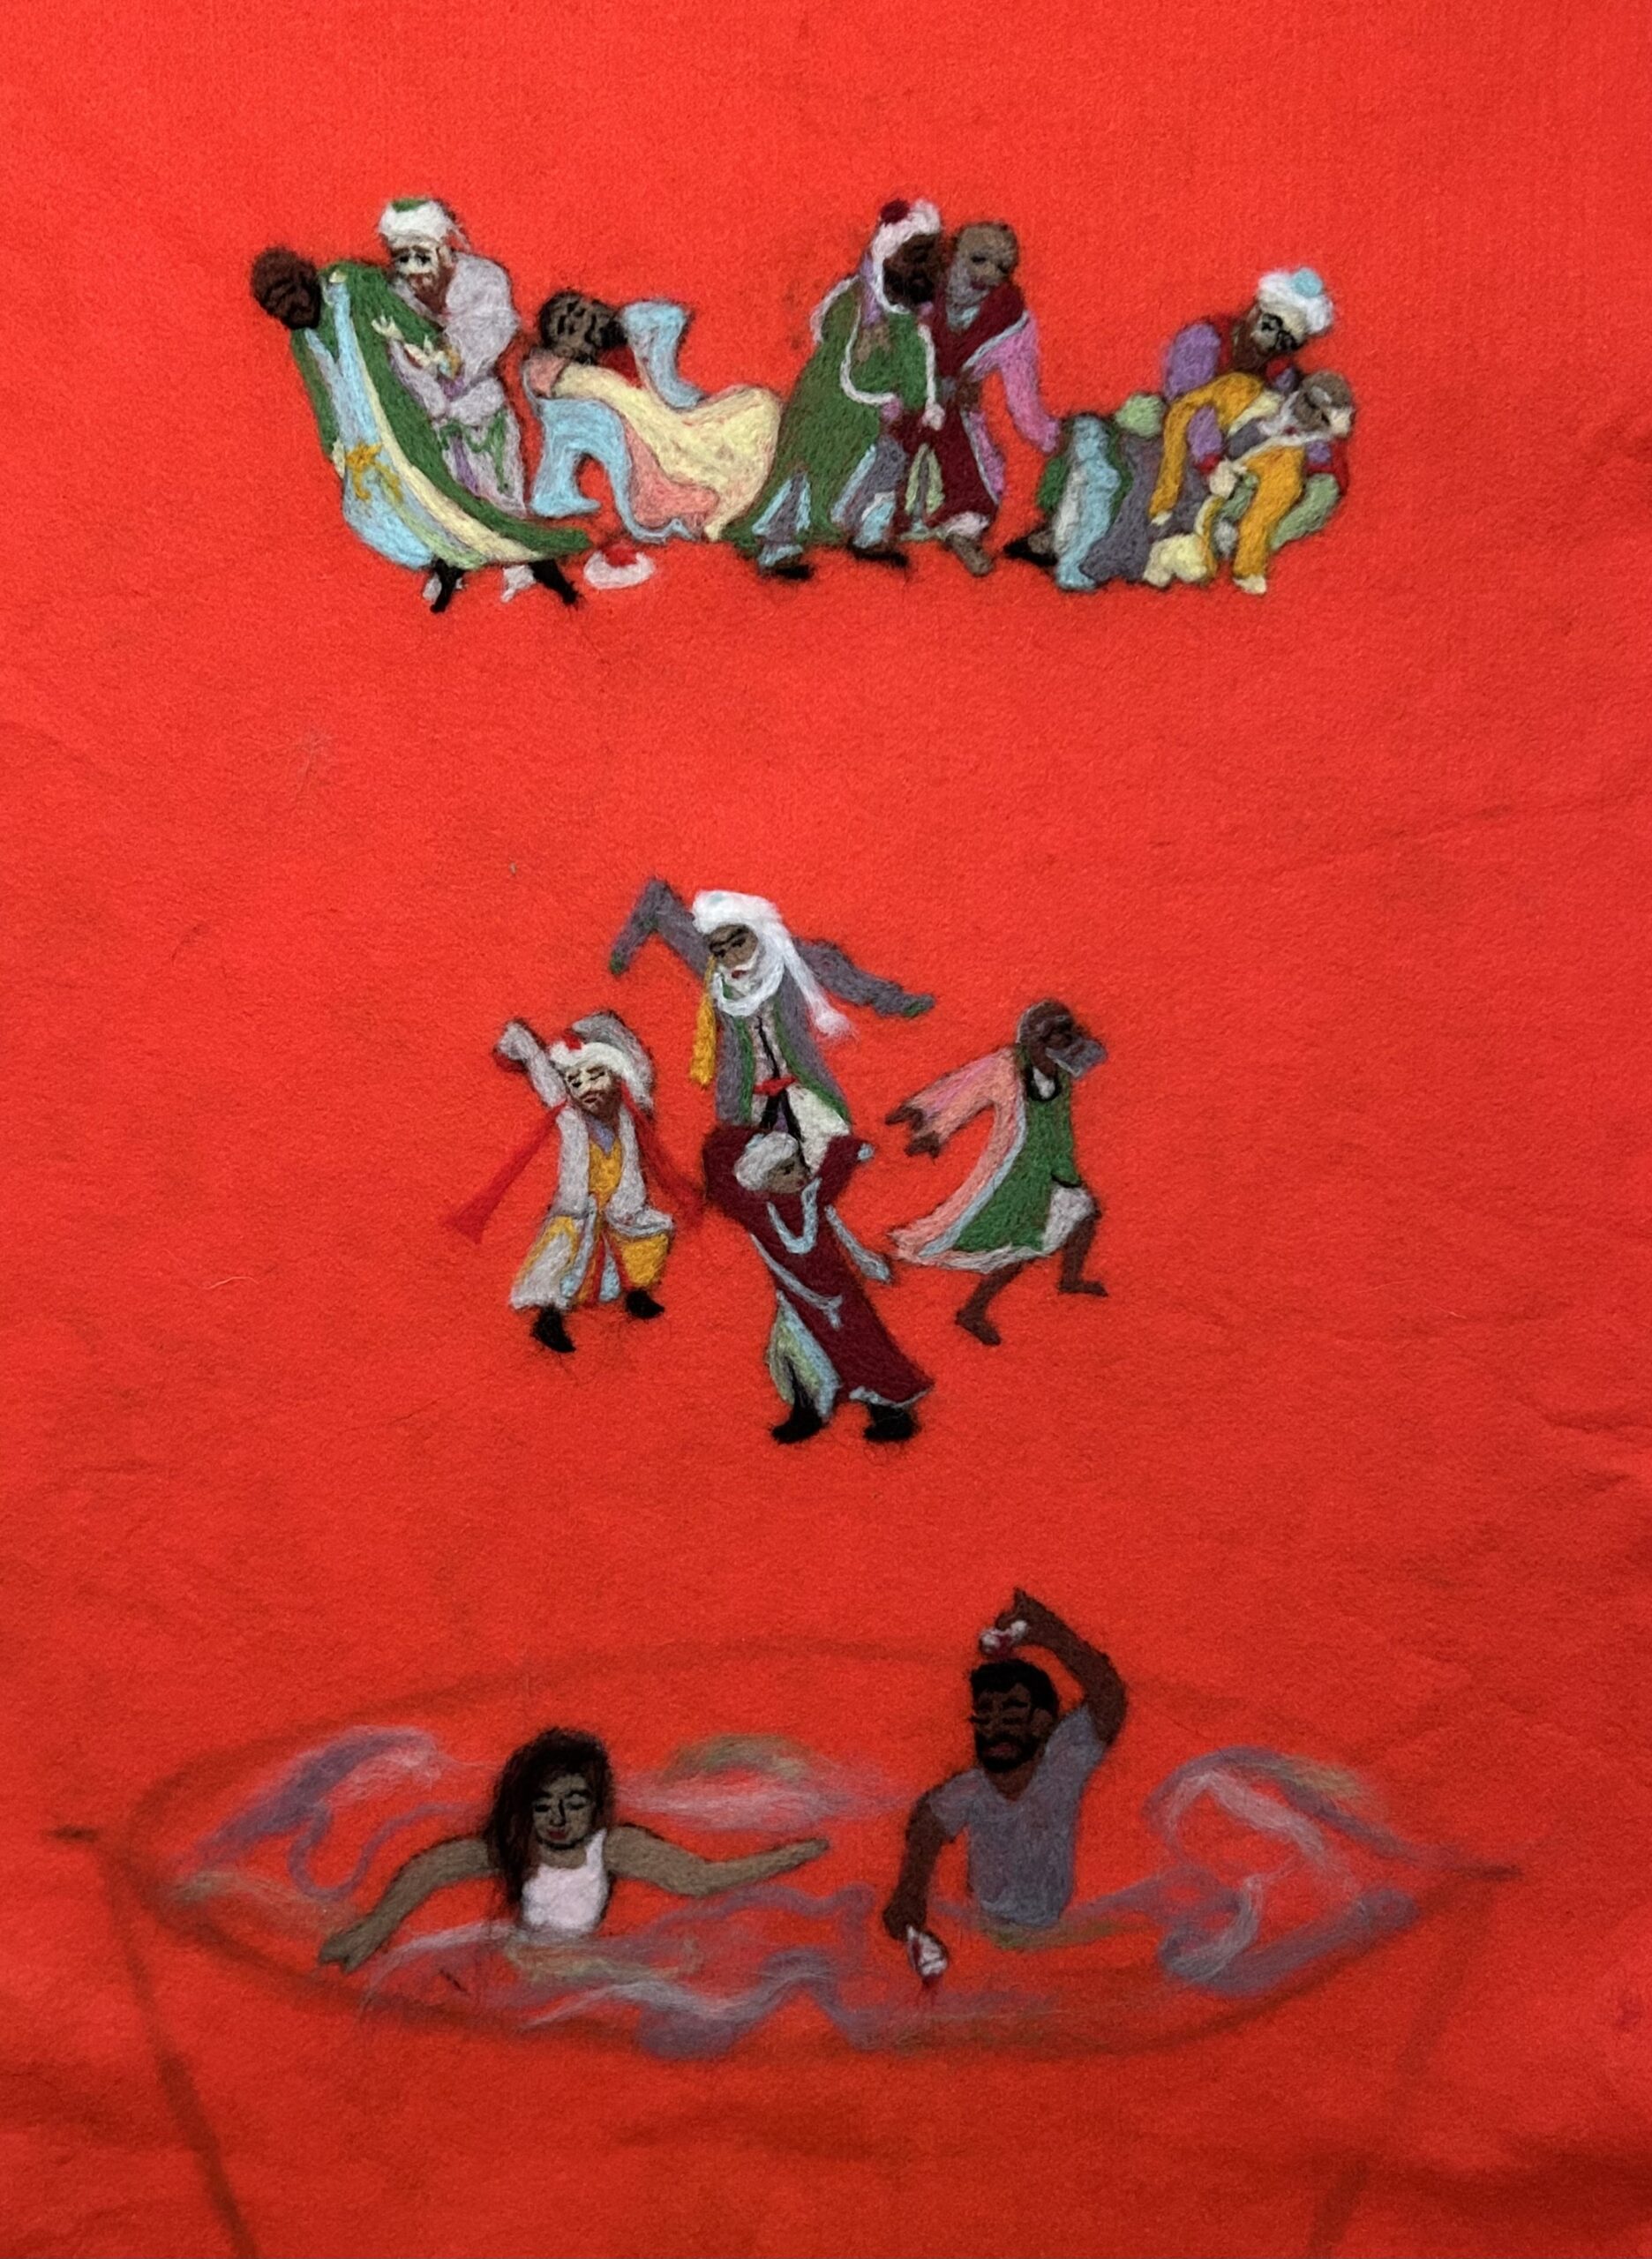 Against a red felt background there are three felted scenes of figures in middle-eastern garb. The bottom scene is two figures in water or air.